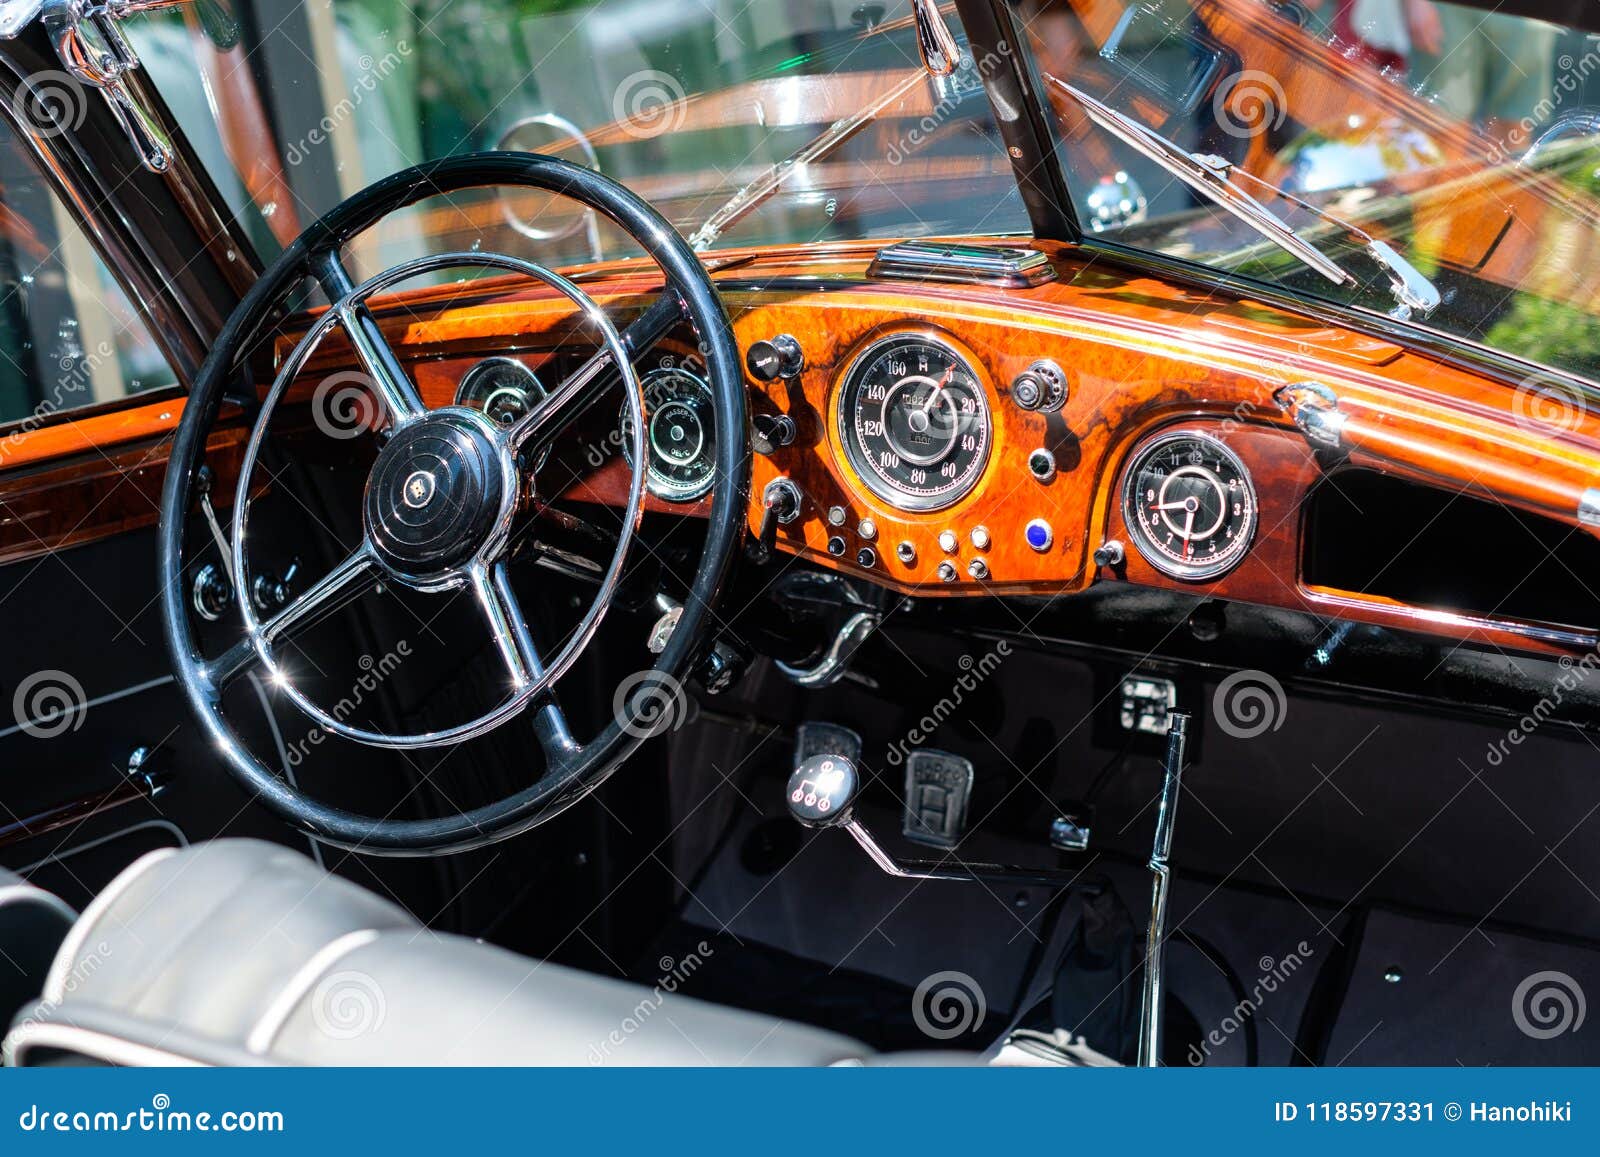 Steering Wheel Dashboard And Interior Of Old Horch Car